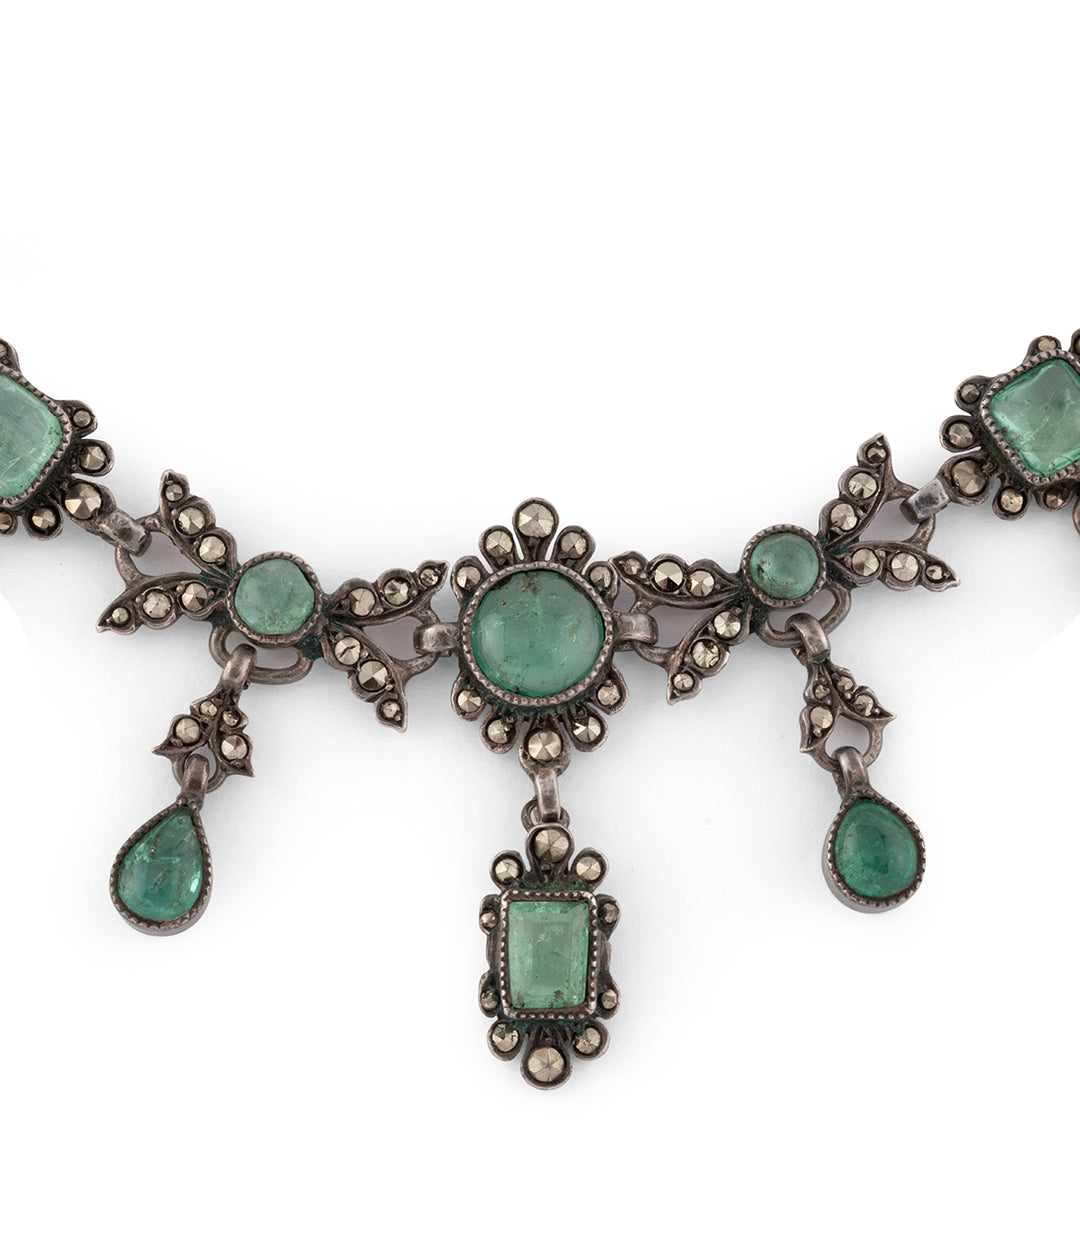 Antique drapery necklace emeralds and silver  "Aato" - Caillou Paris